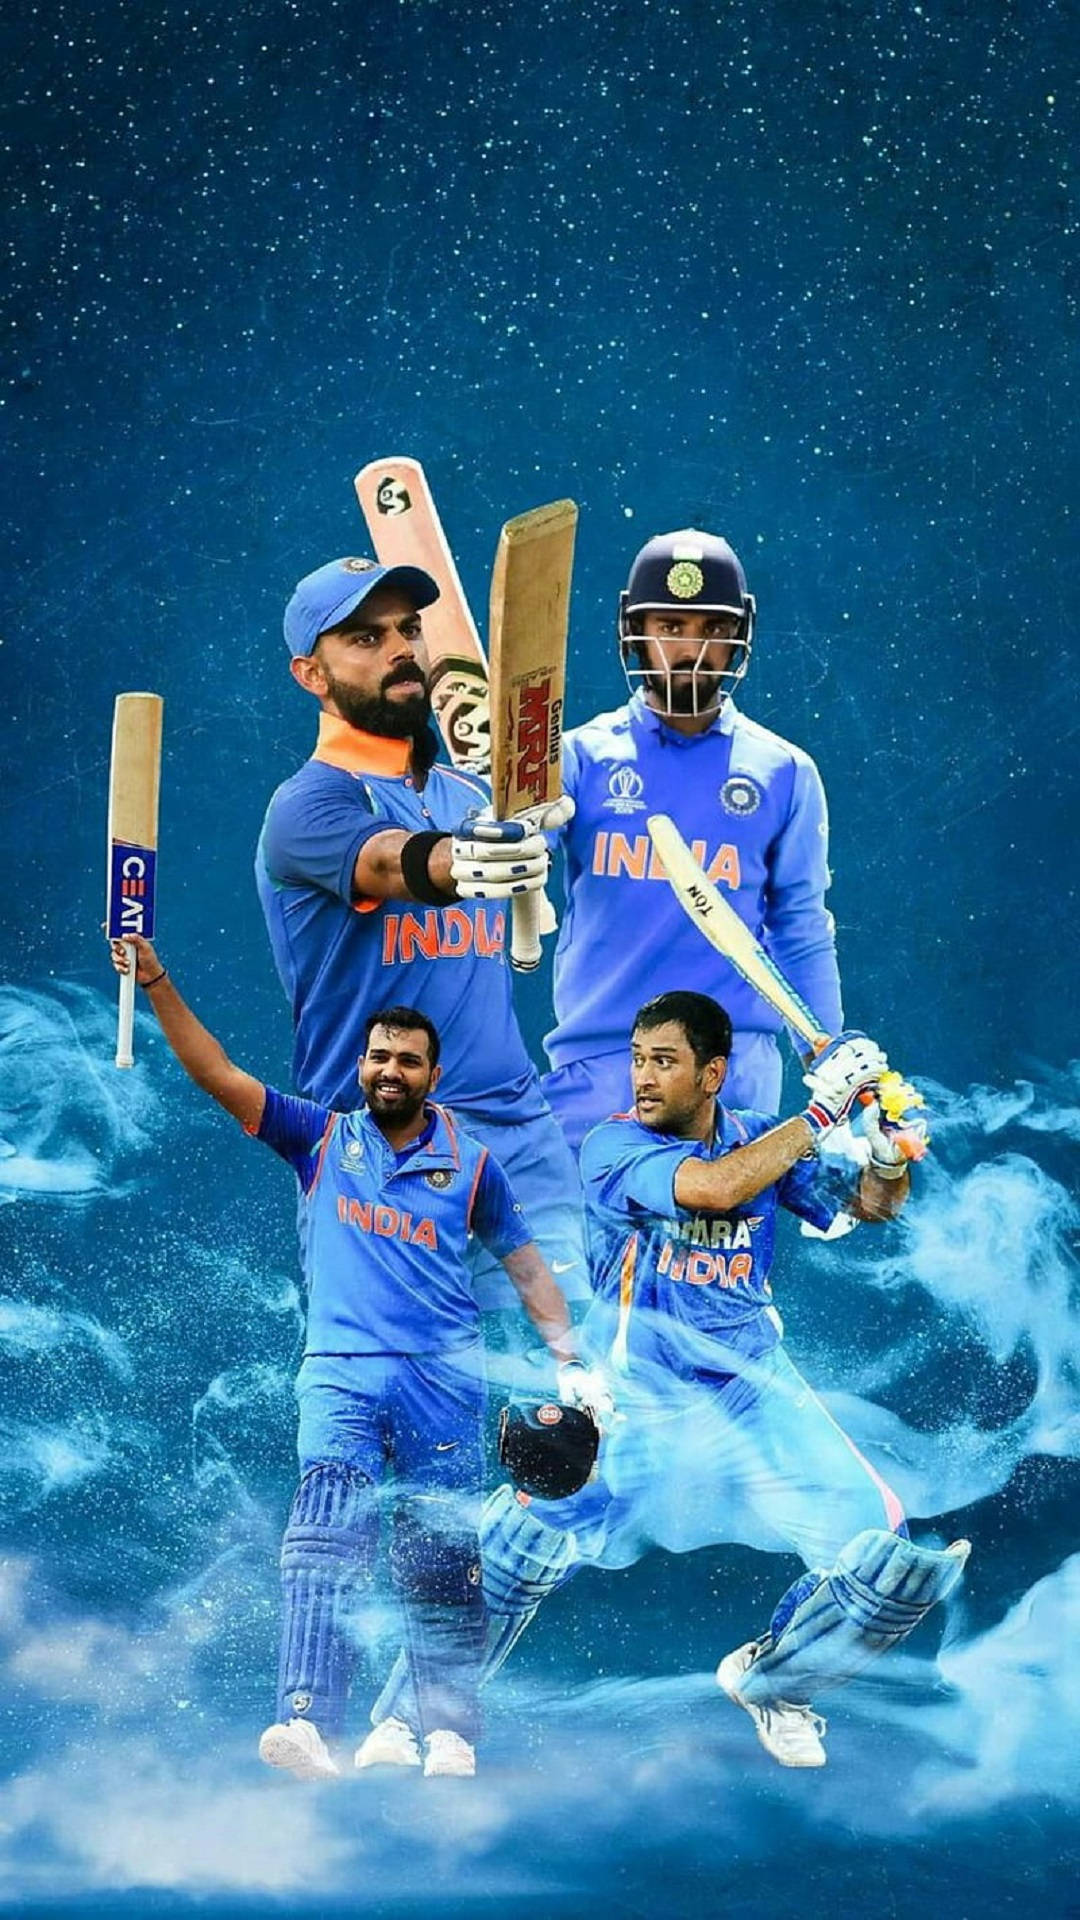 Indian Cricket Blue Theme Poster Background